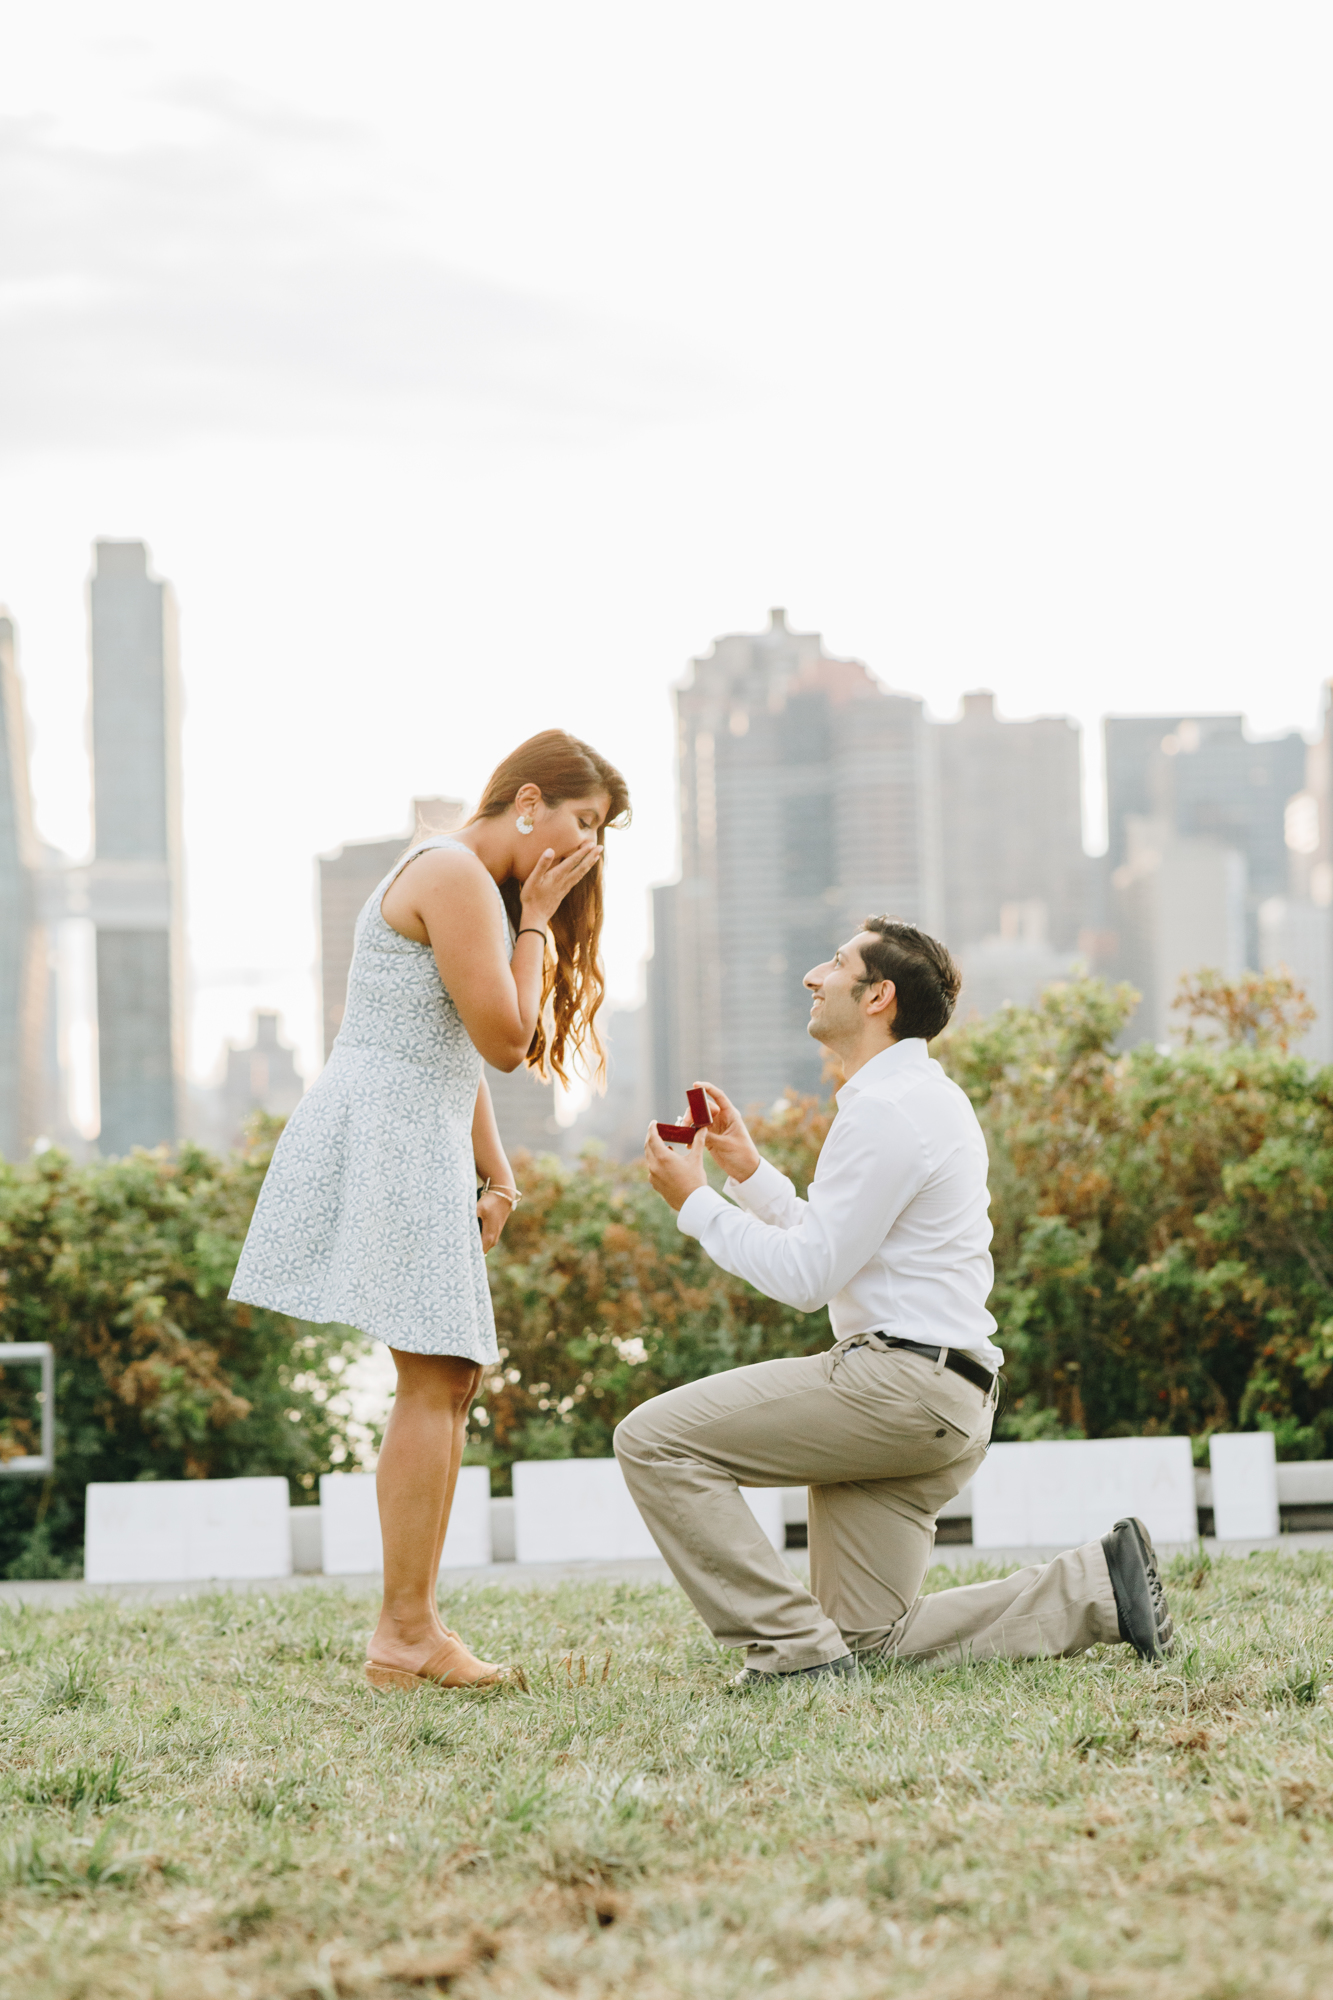 Intimate Places to Propose in NYC